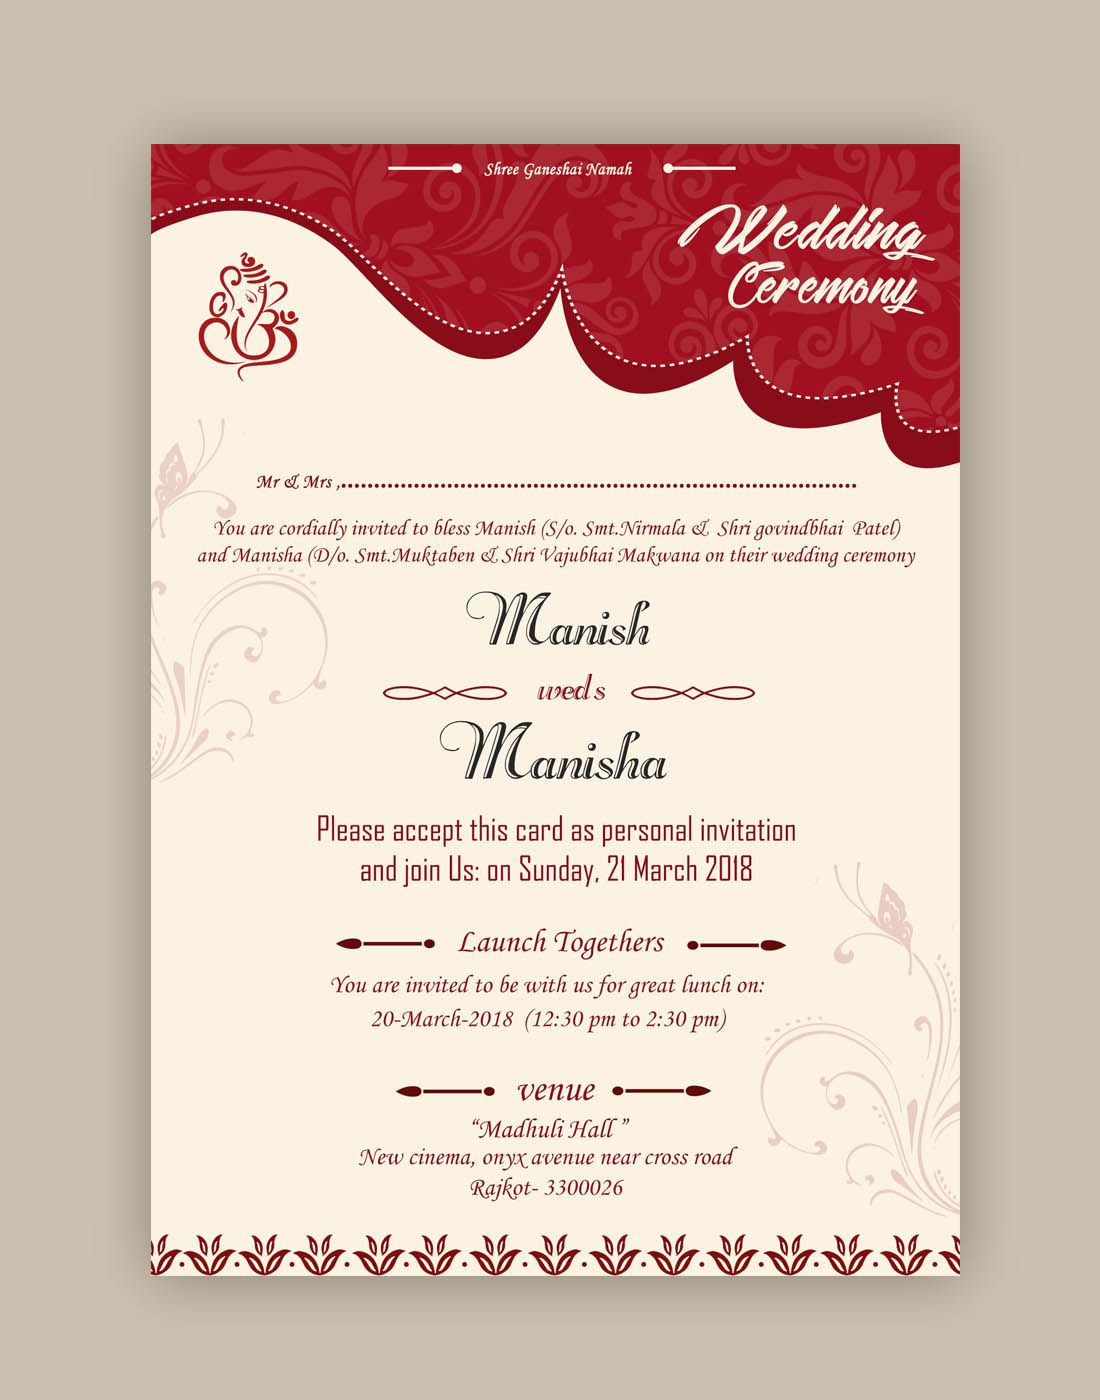 Free Wedding Card Psd Templates In 2019 | Free Wedding Cards With Invitation Cards Templates For Marriage